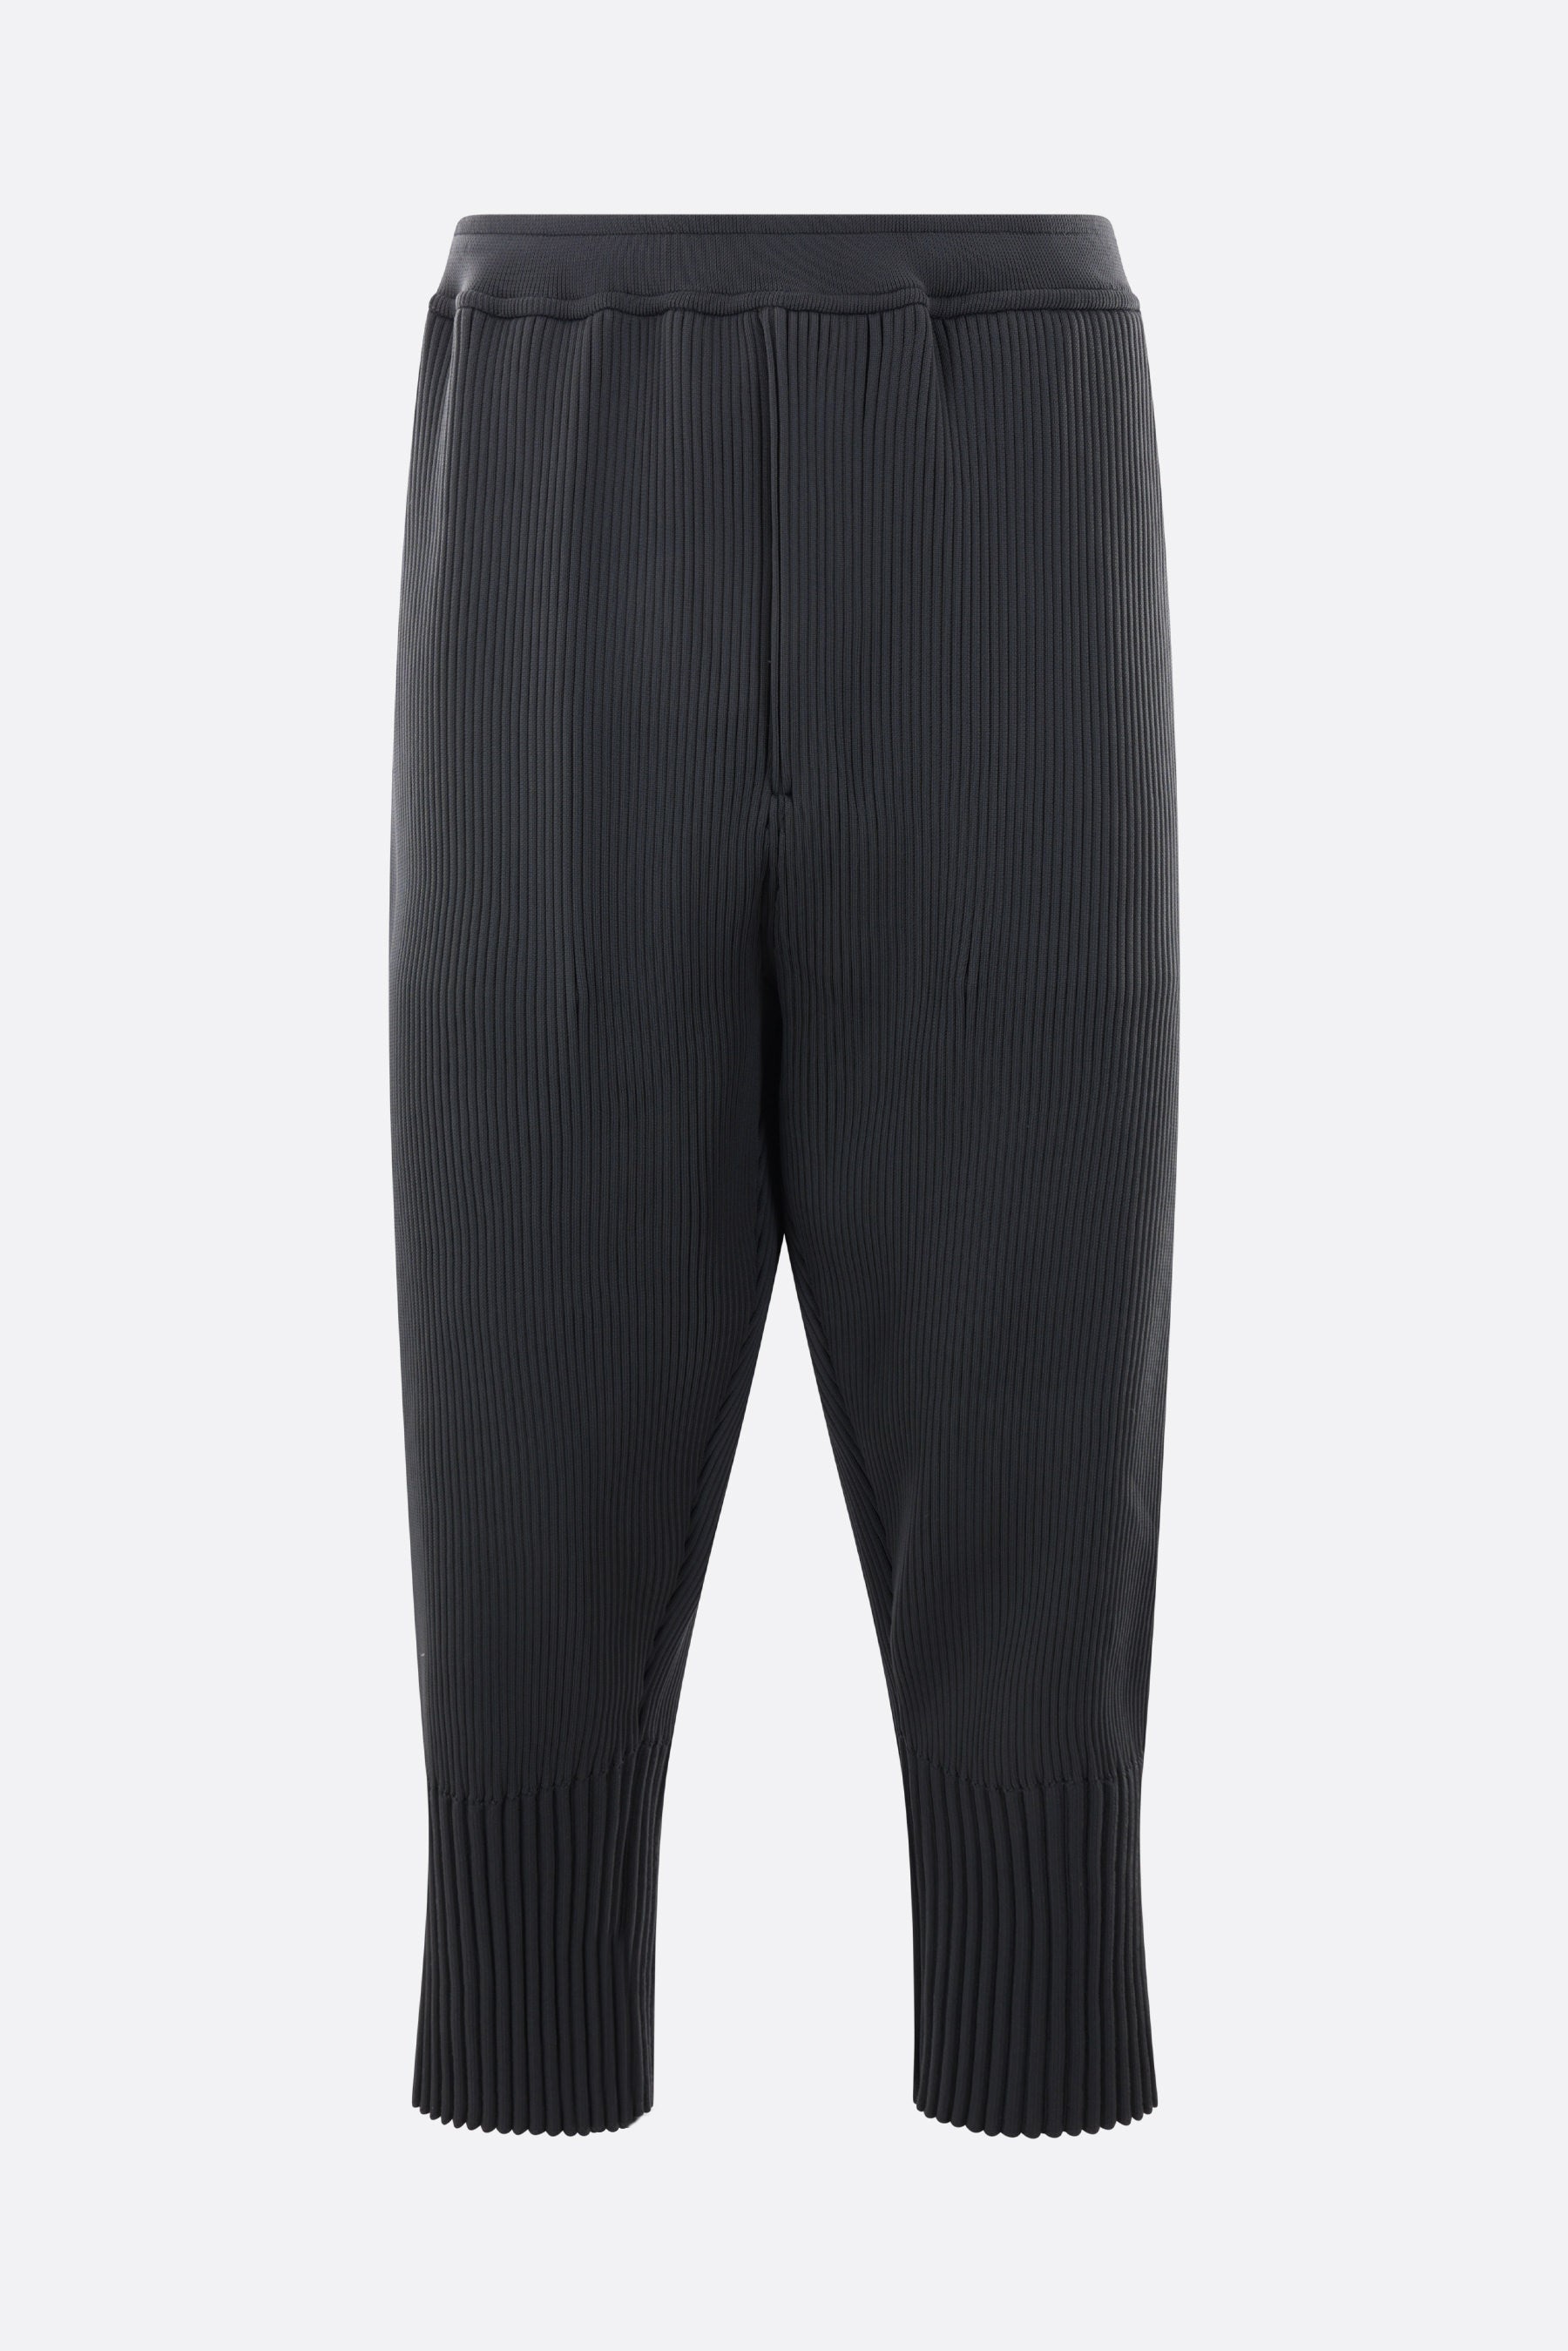 Fluted Tapered pants in ribbed recycled tecnical knit